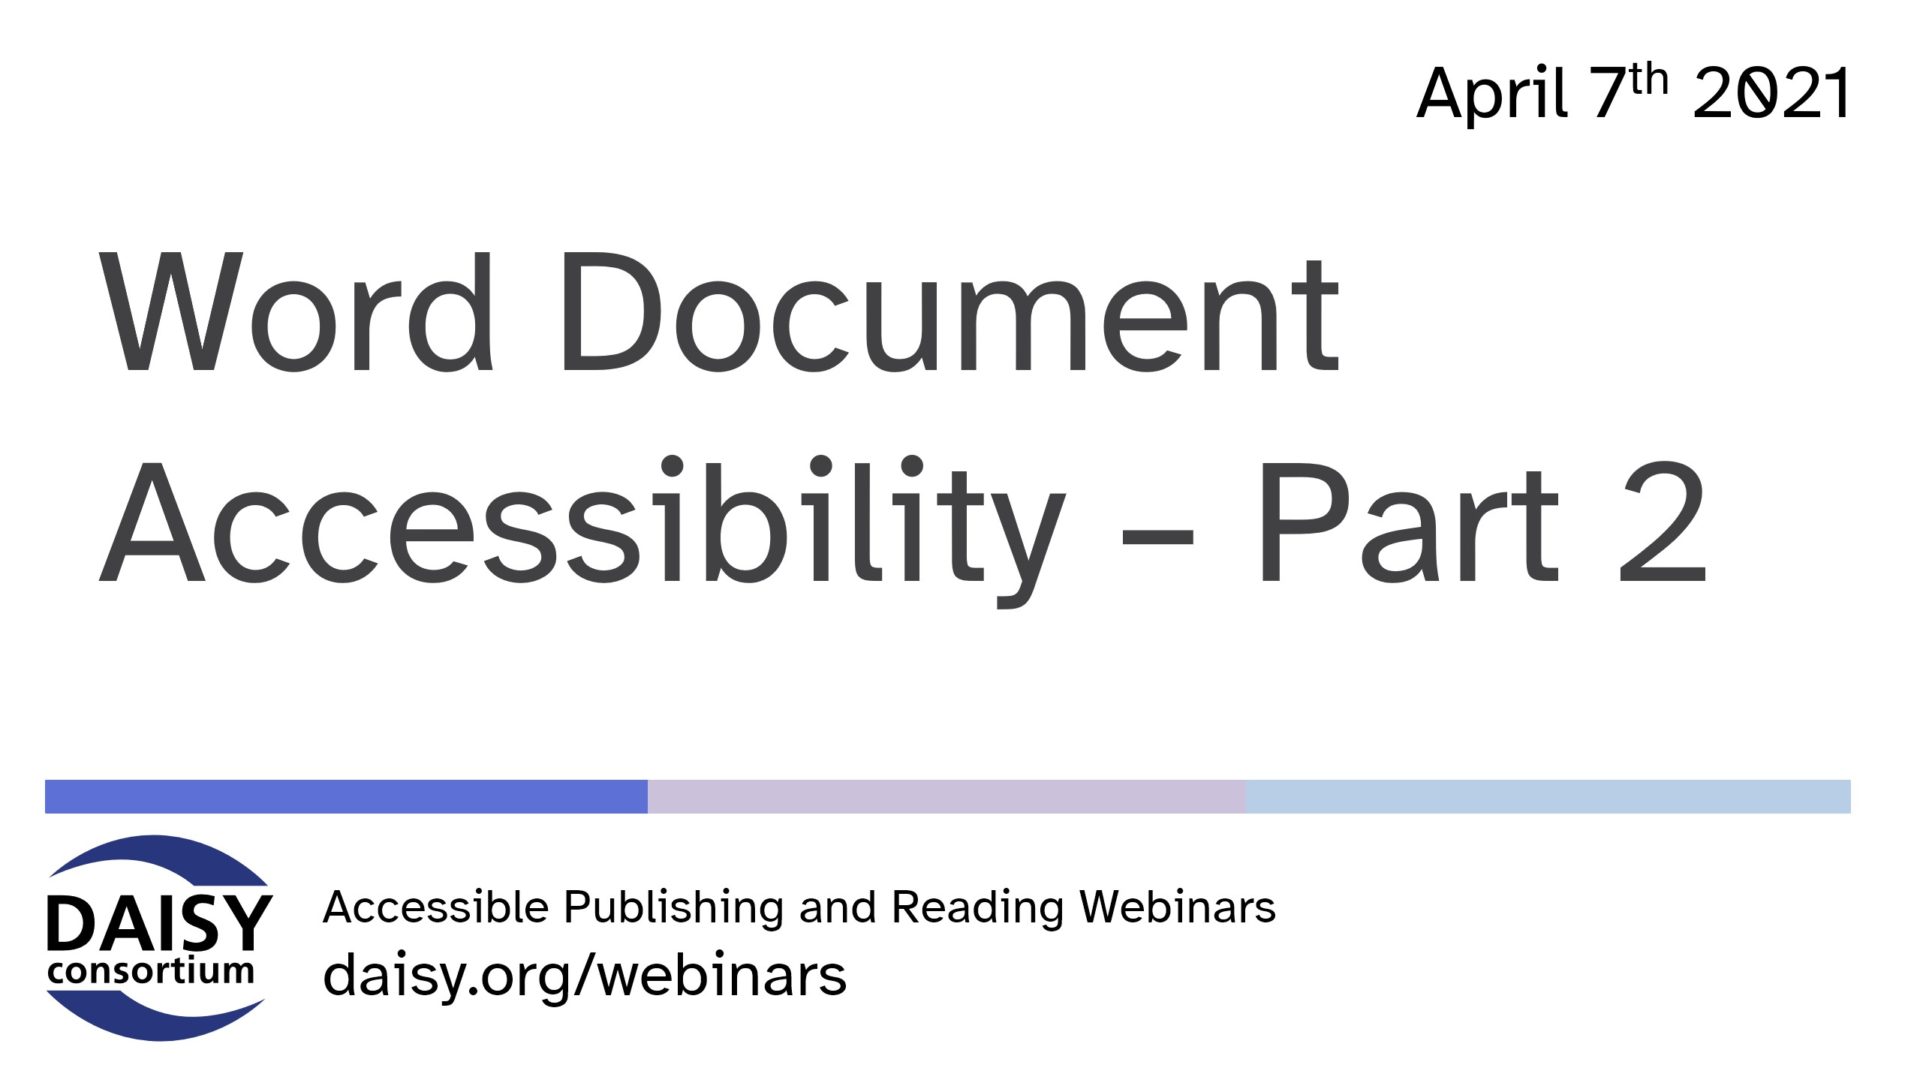 Word Document Accessibility Part 2 opening slide